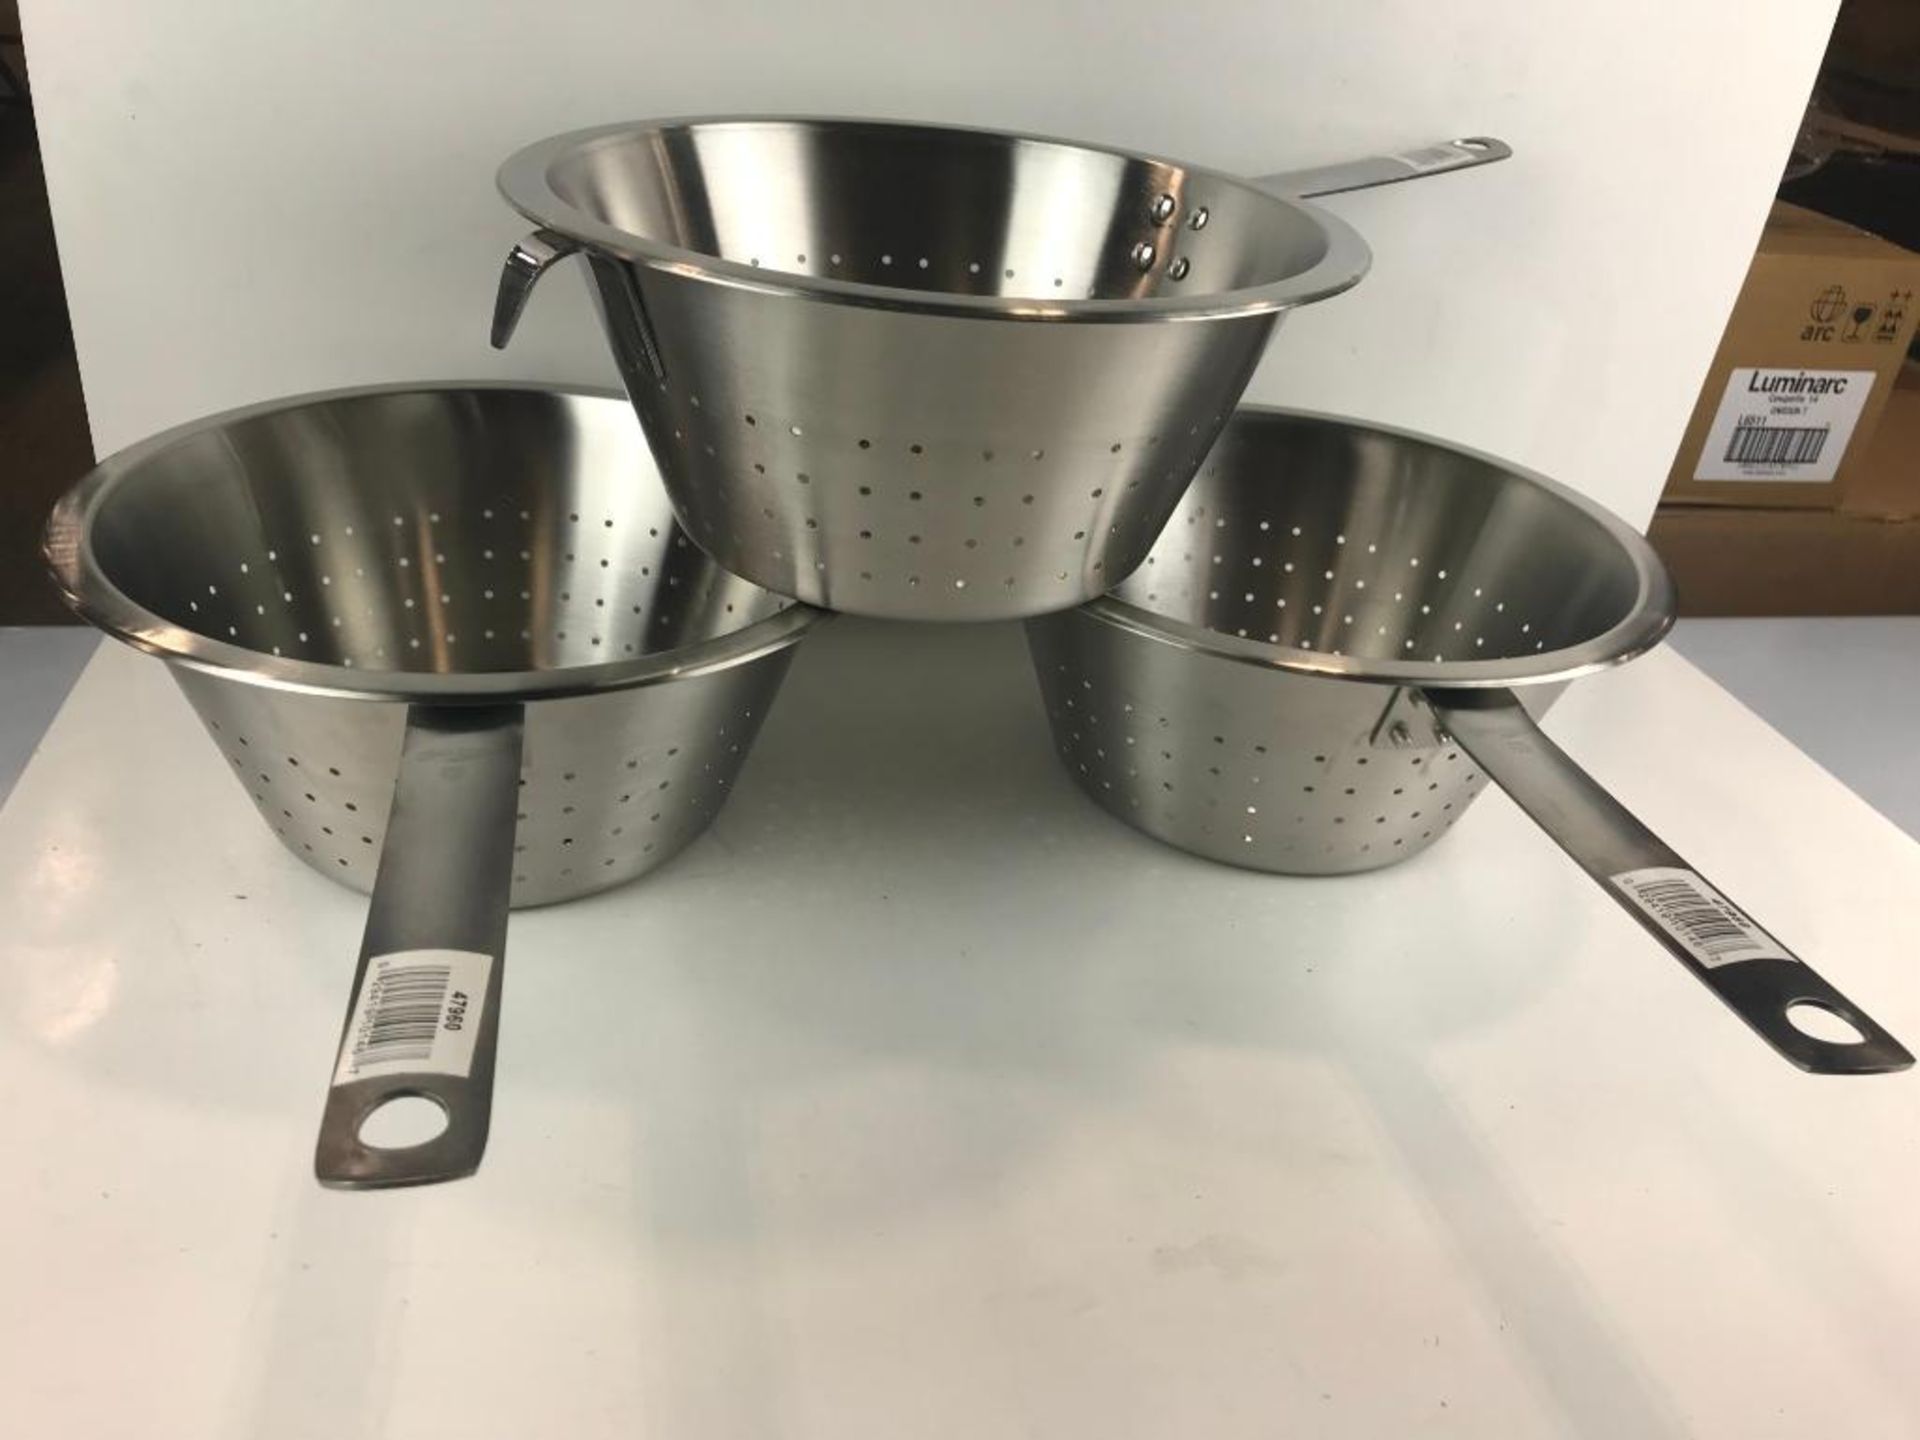 VOLLRATH 47960 HEAVY STAINLESS STEEL 10.5" X 4" SPAGHETTI COOKER/STRAINER, LOT OF 3